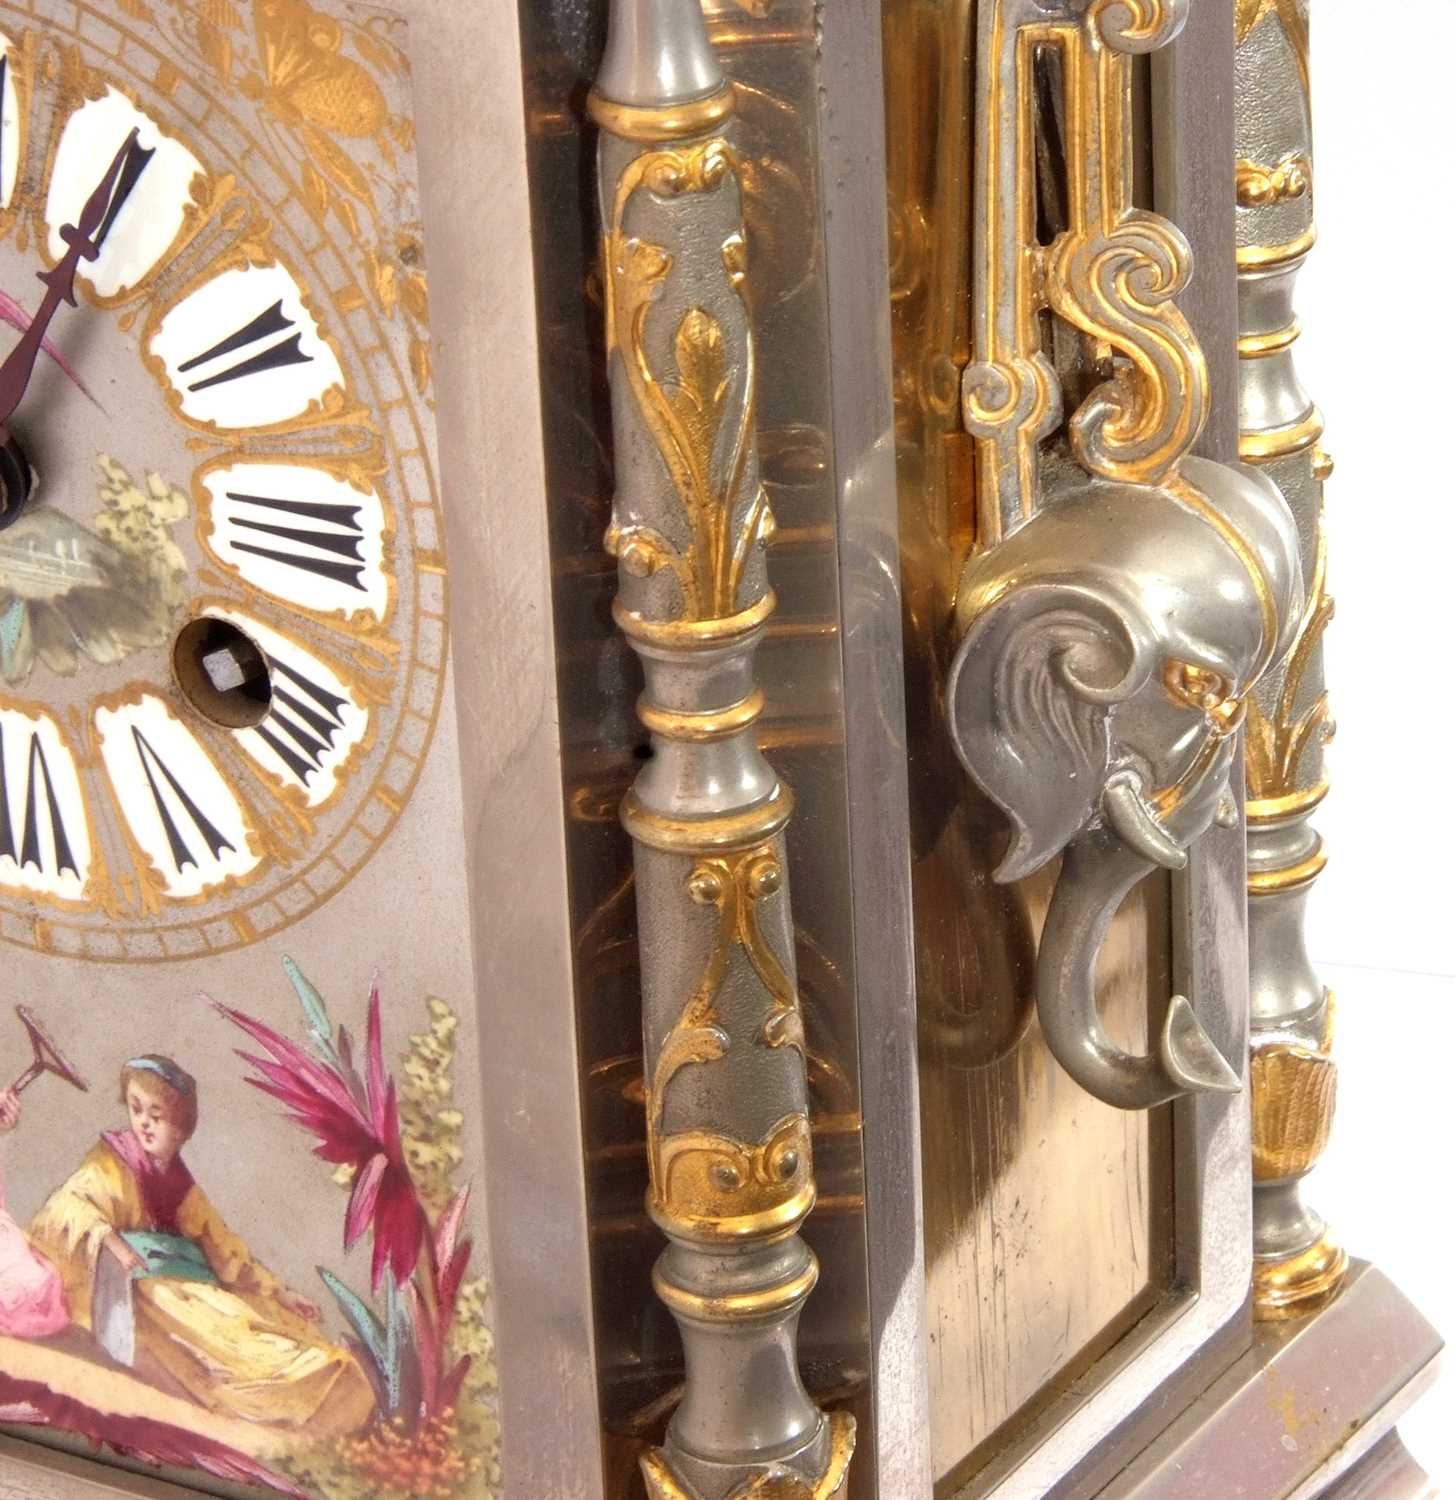 Good quality late 19th/early 20th century mantel clock, set in architectural metal and gilt - Image 6 of 11